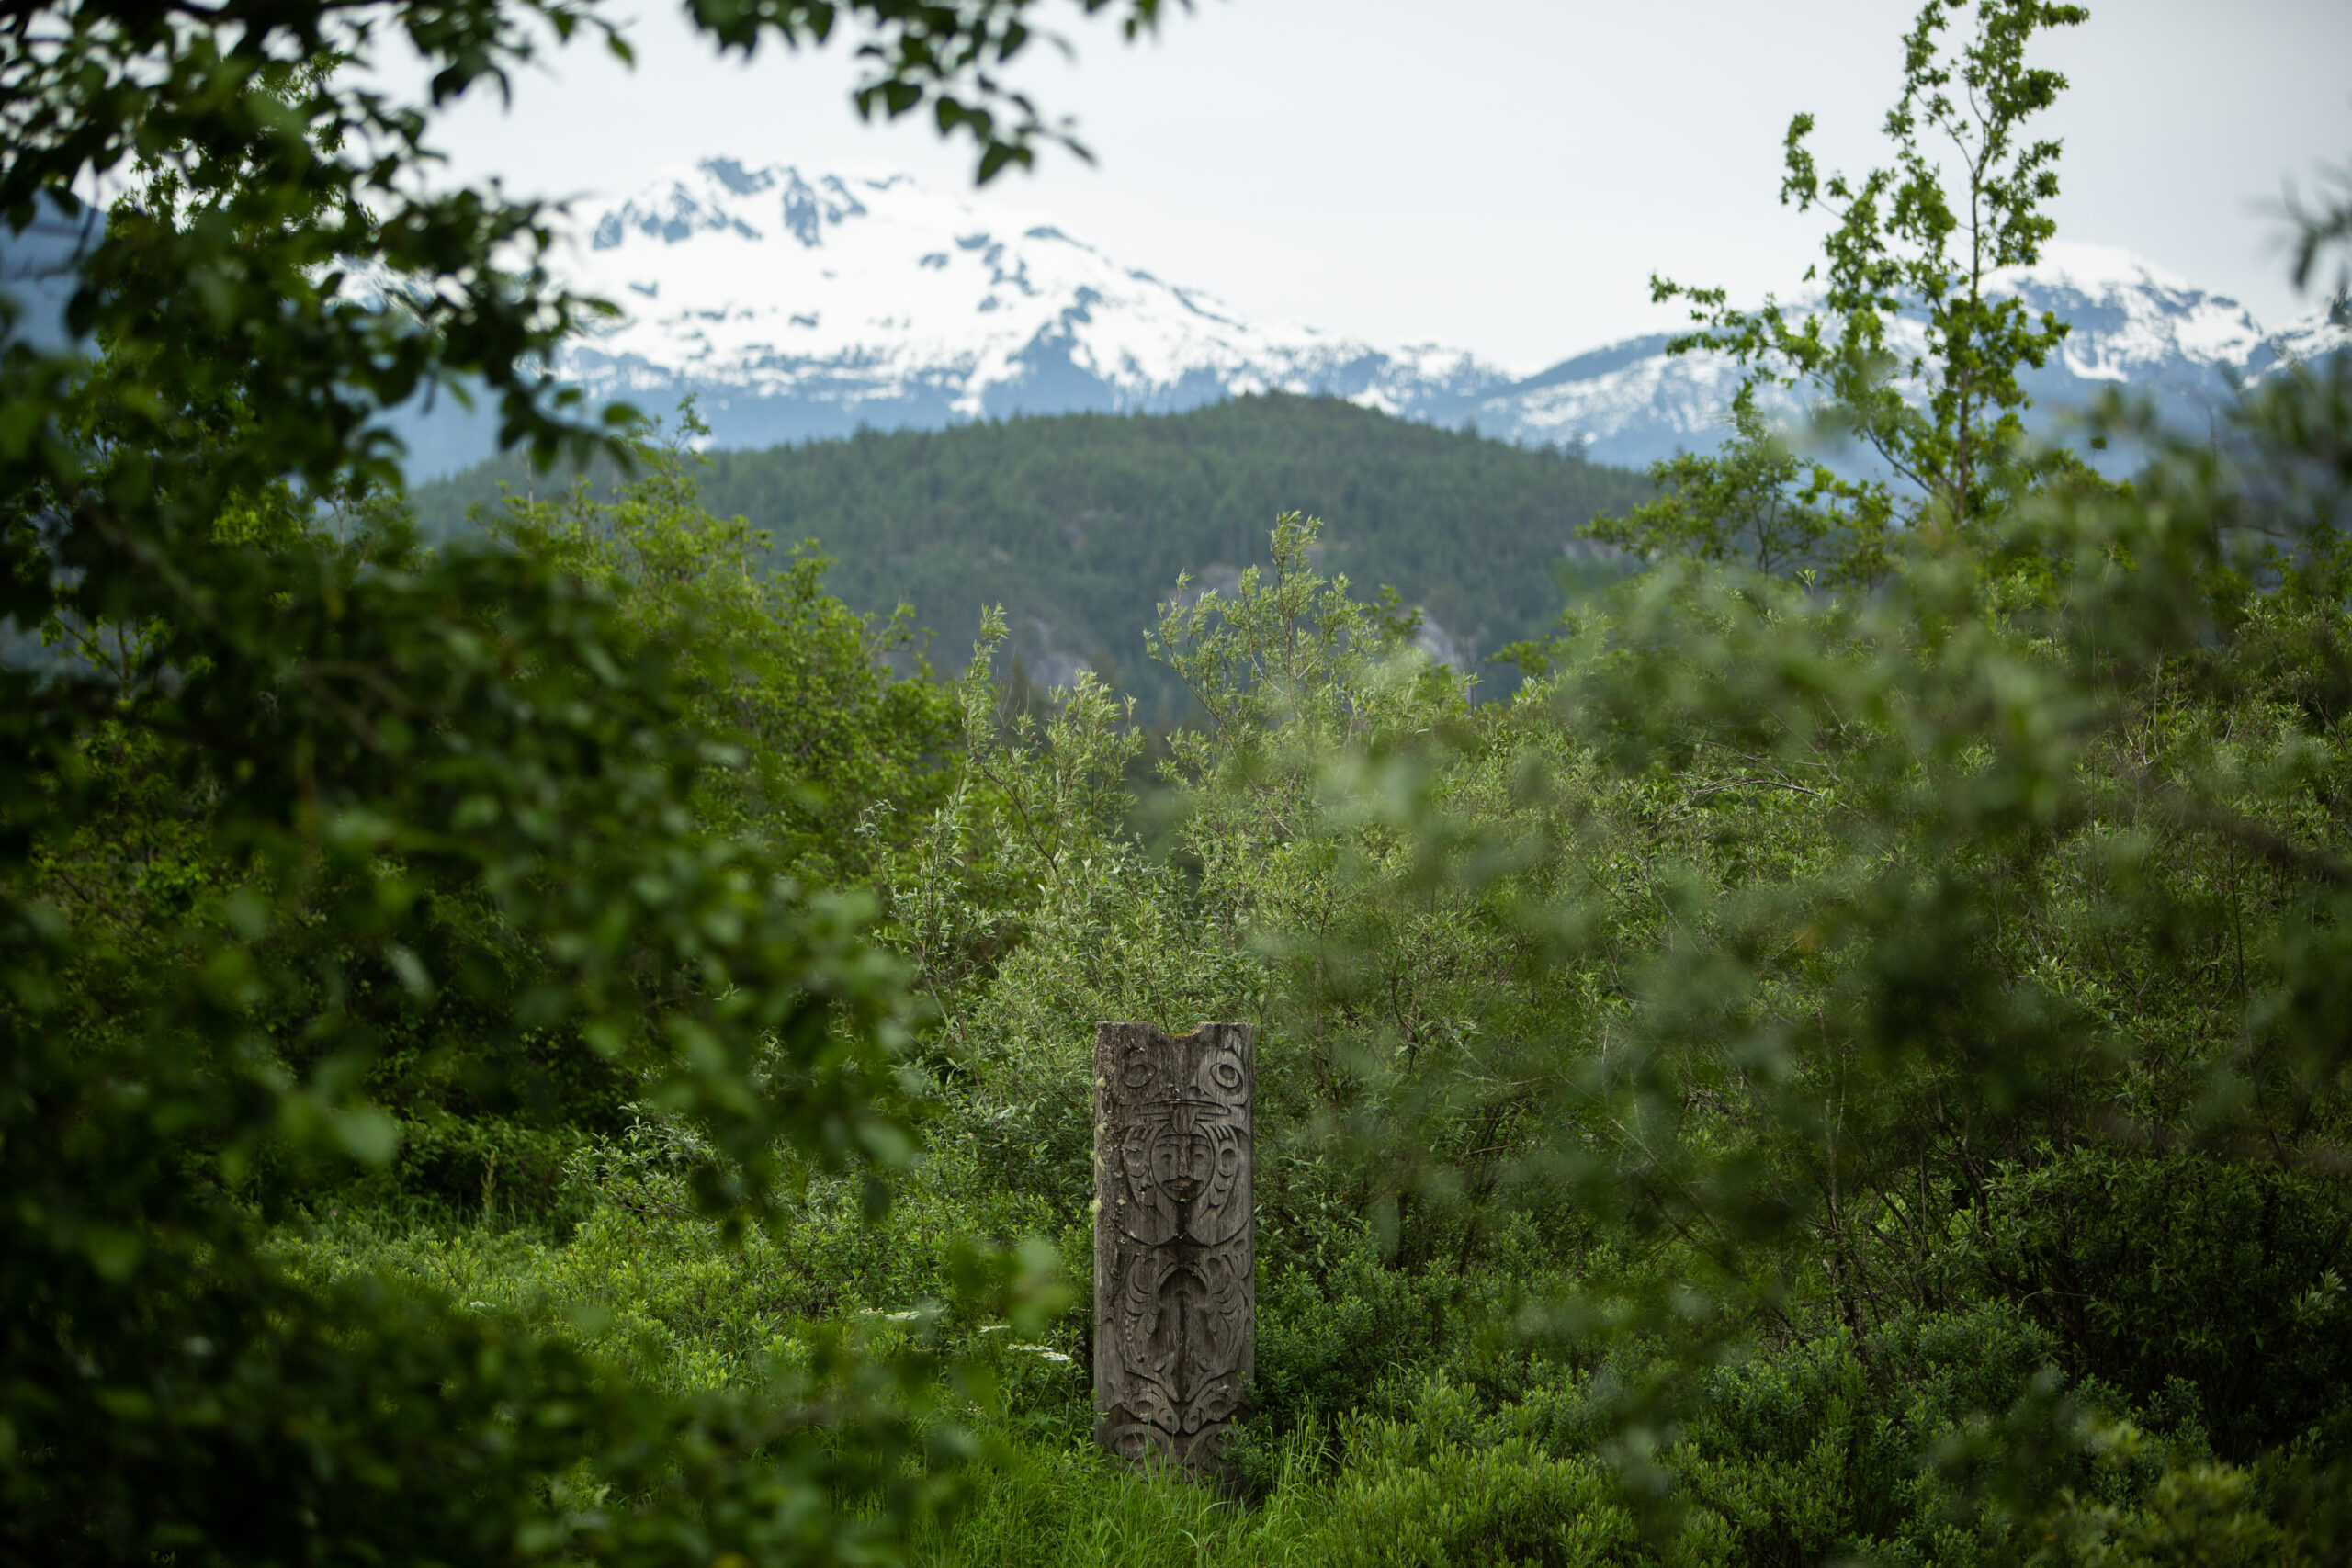 A carved totem pole in the Squamish estuary looks small as it projects out of green bushes and trees that take up most of the frame. Snow-capped mountains are in the distance.